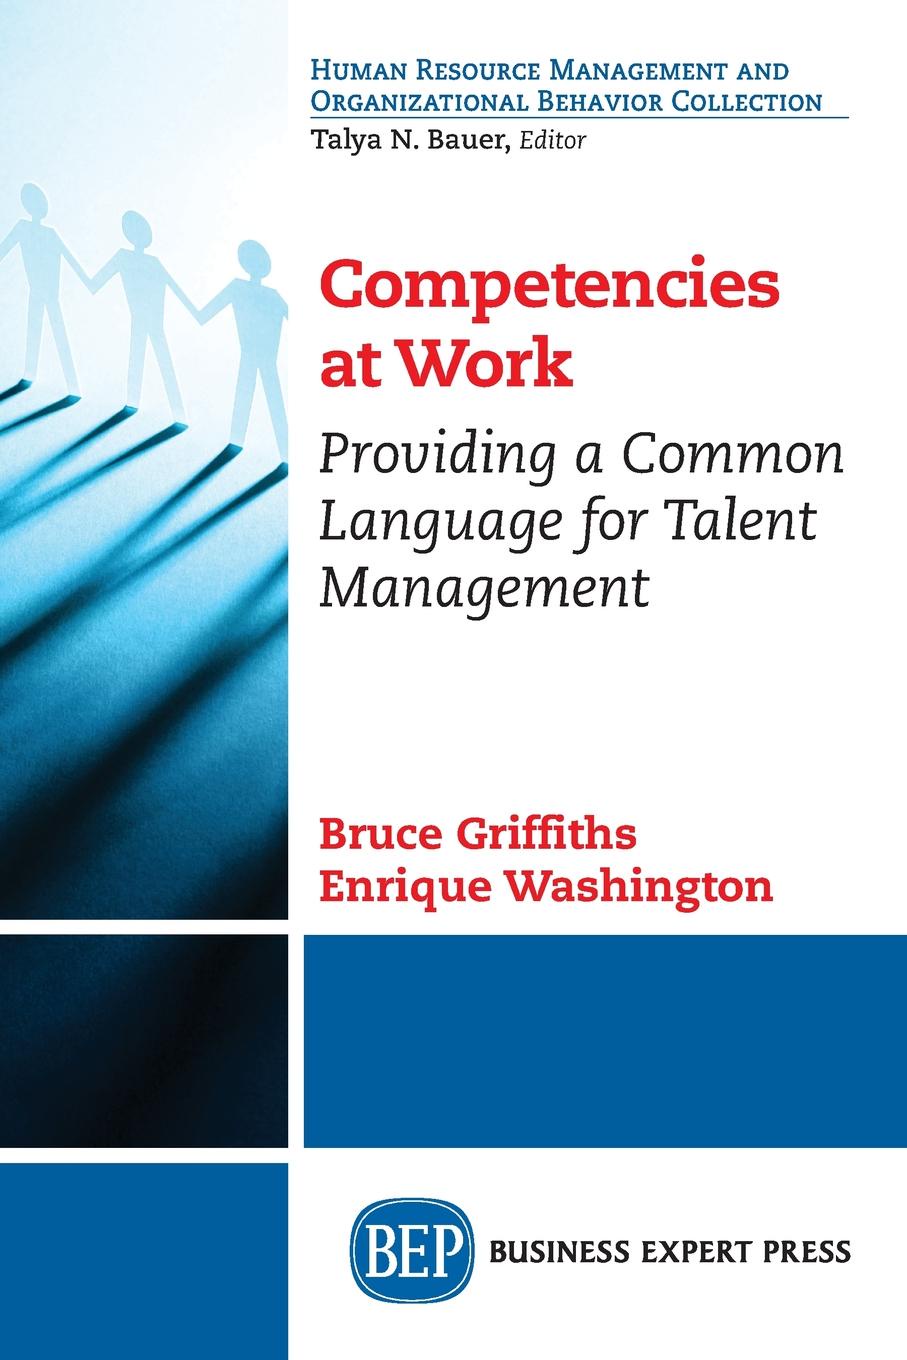 Competencies at Work. Providing a Common Language for Talent Management